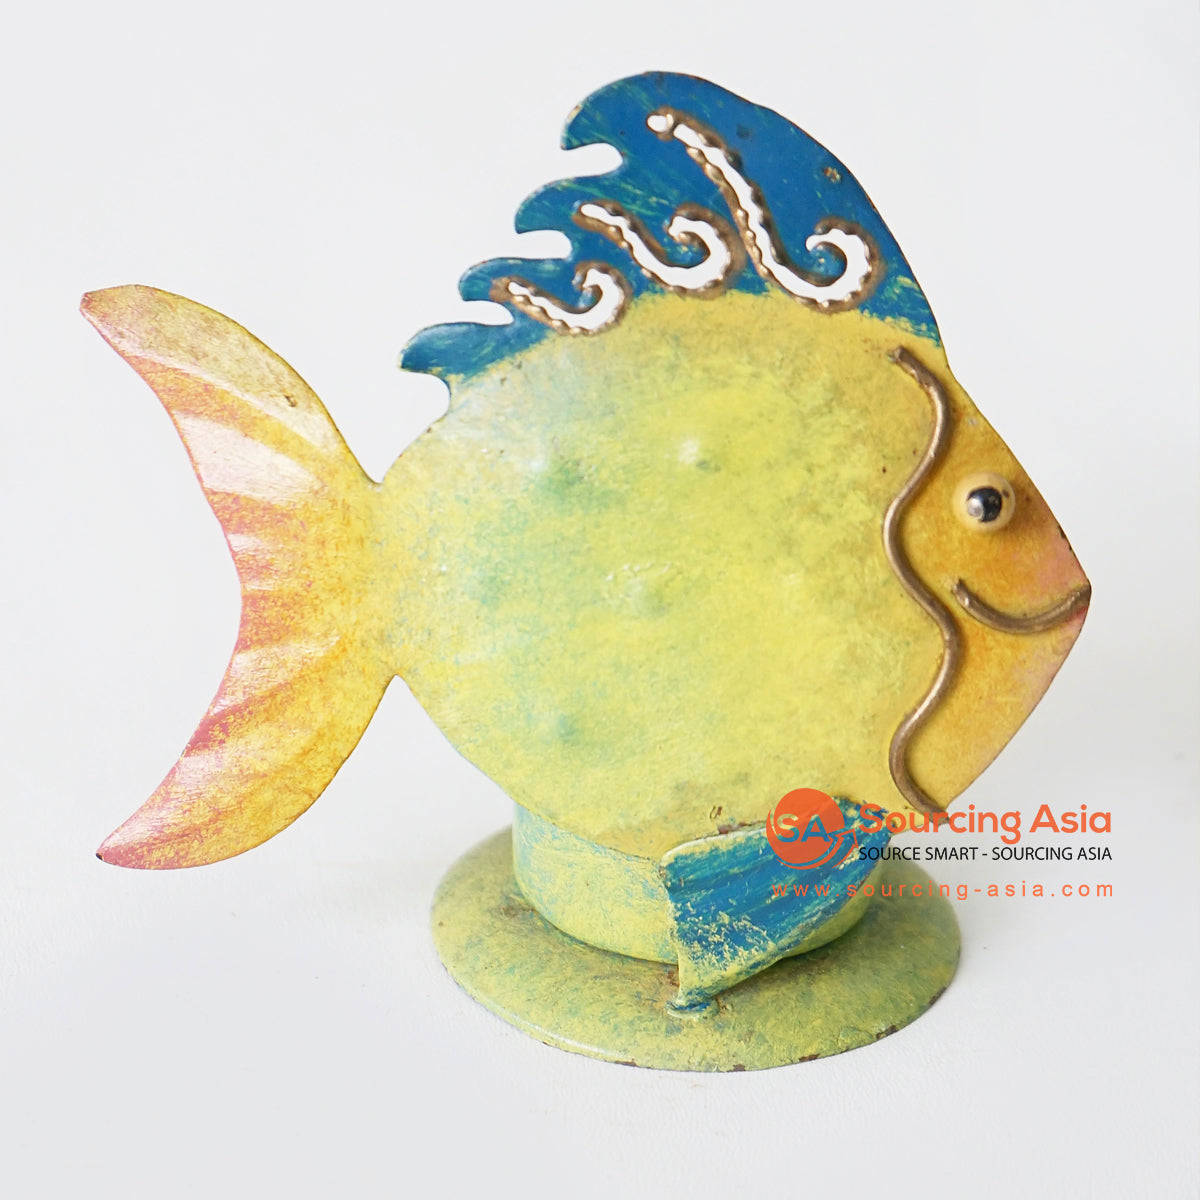 MHRC080 HAND PAINTED METAL CANDLE HOLDER WITH YELLOW FISH DECORATION